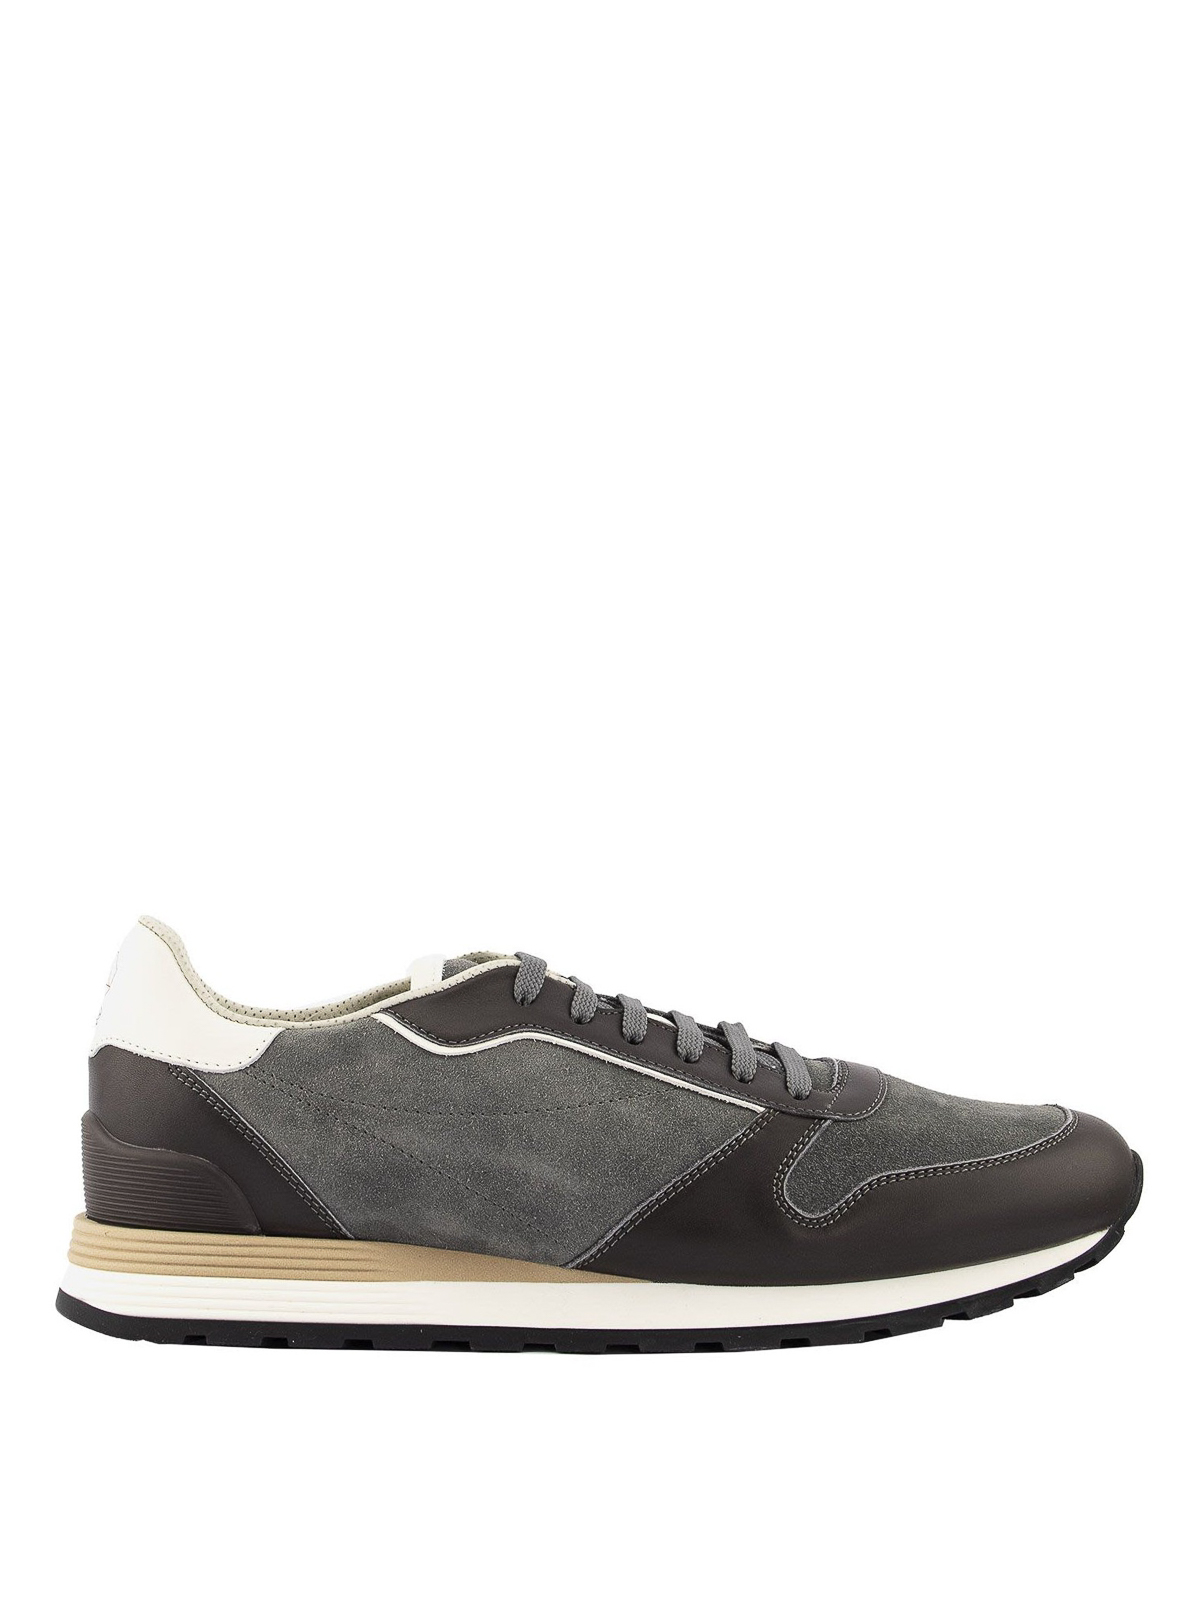 Trainers Brunello Cucinelli - Leather sneakers - MZUSBBA258CD319